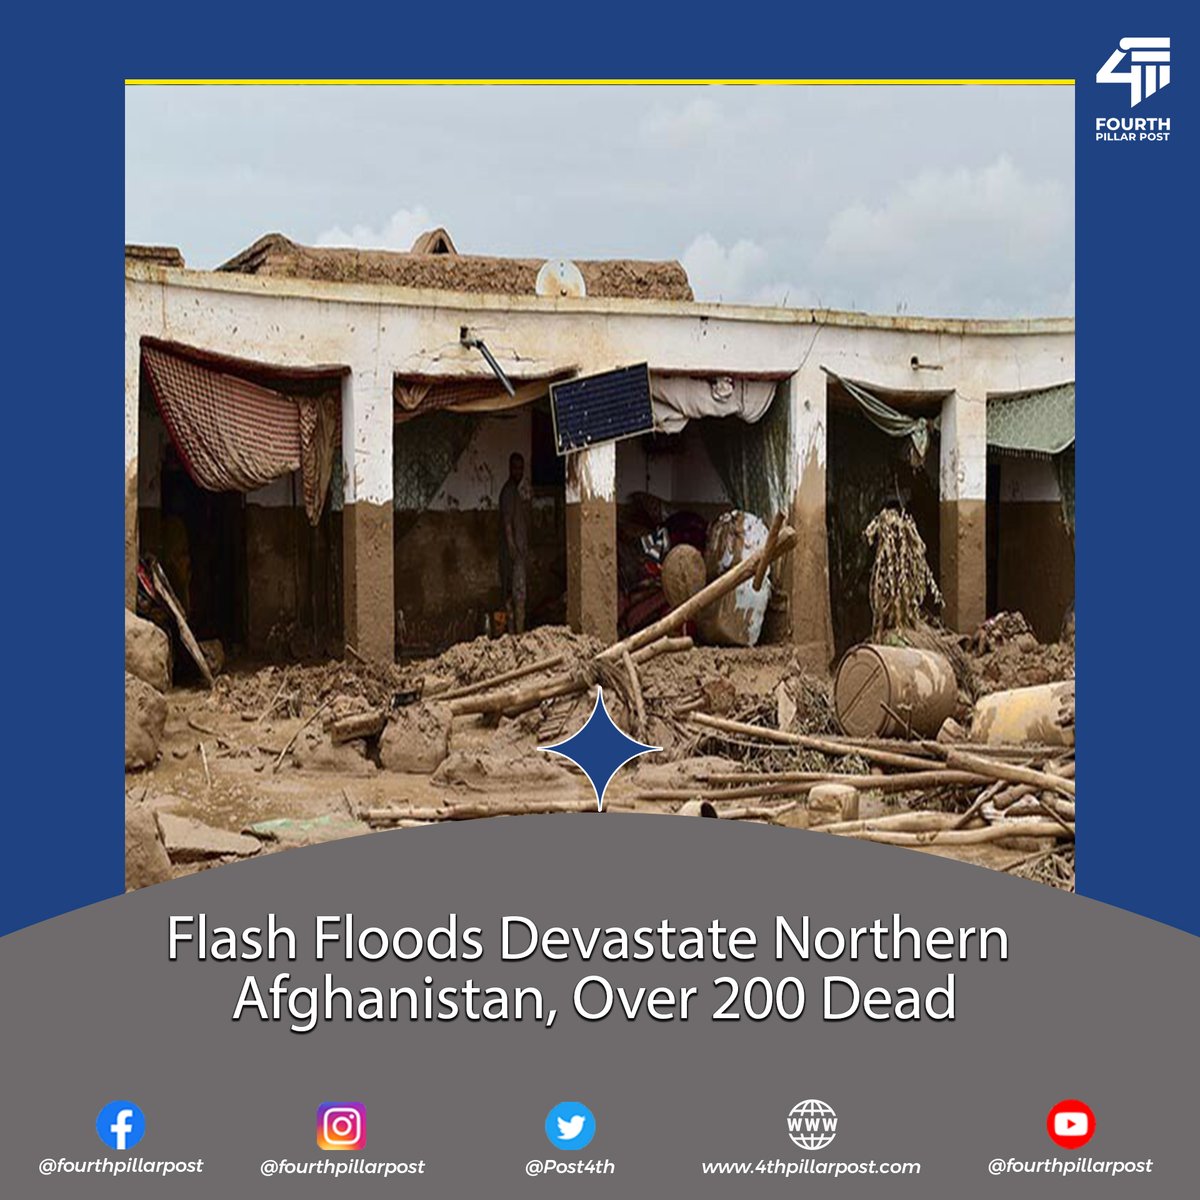 Tragic news from Afghanistan as flash floods claim over 200 lives in Baghlan province alone. Our hearts go out to all affected by this devastating disaster. #AfghanistanFloods #NaturalDisaster #HumanitarianCrisis
Read more: 4thpillarpost.com